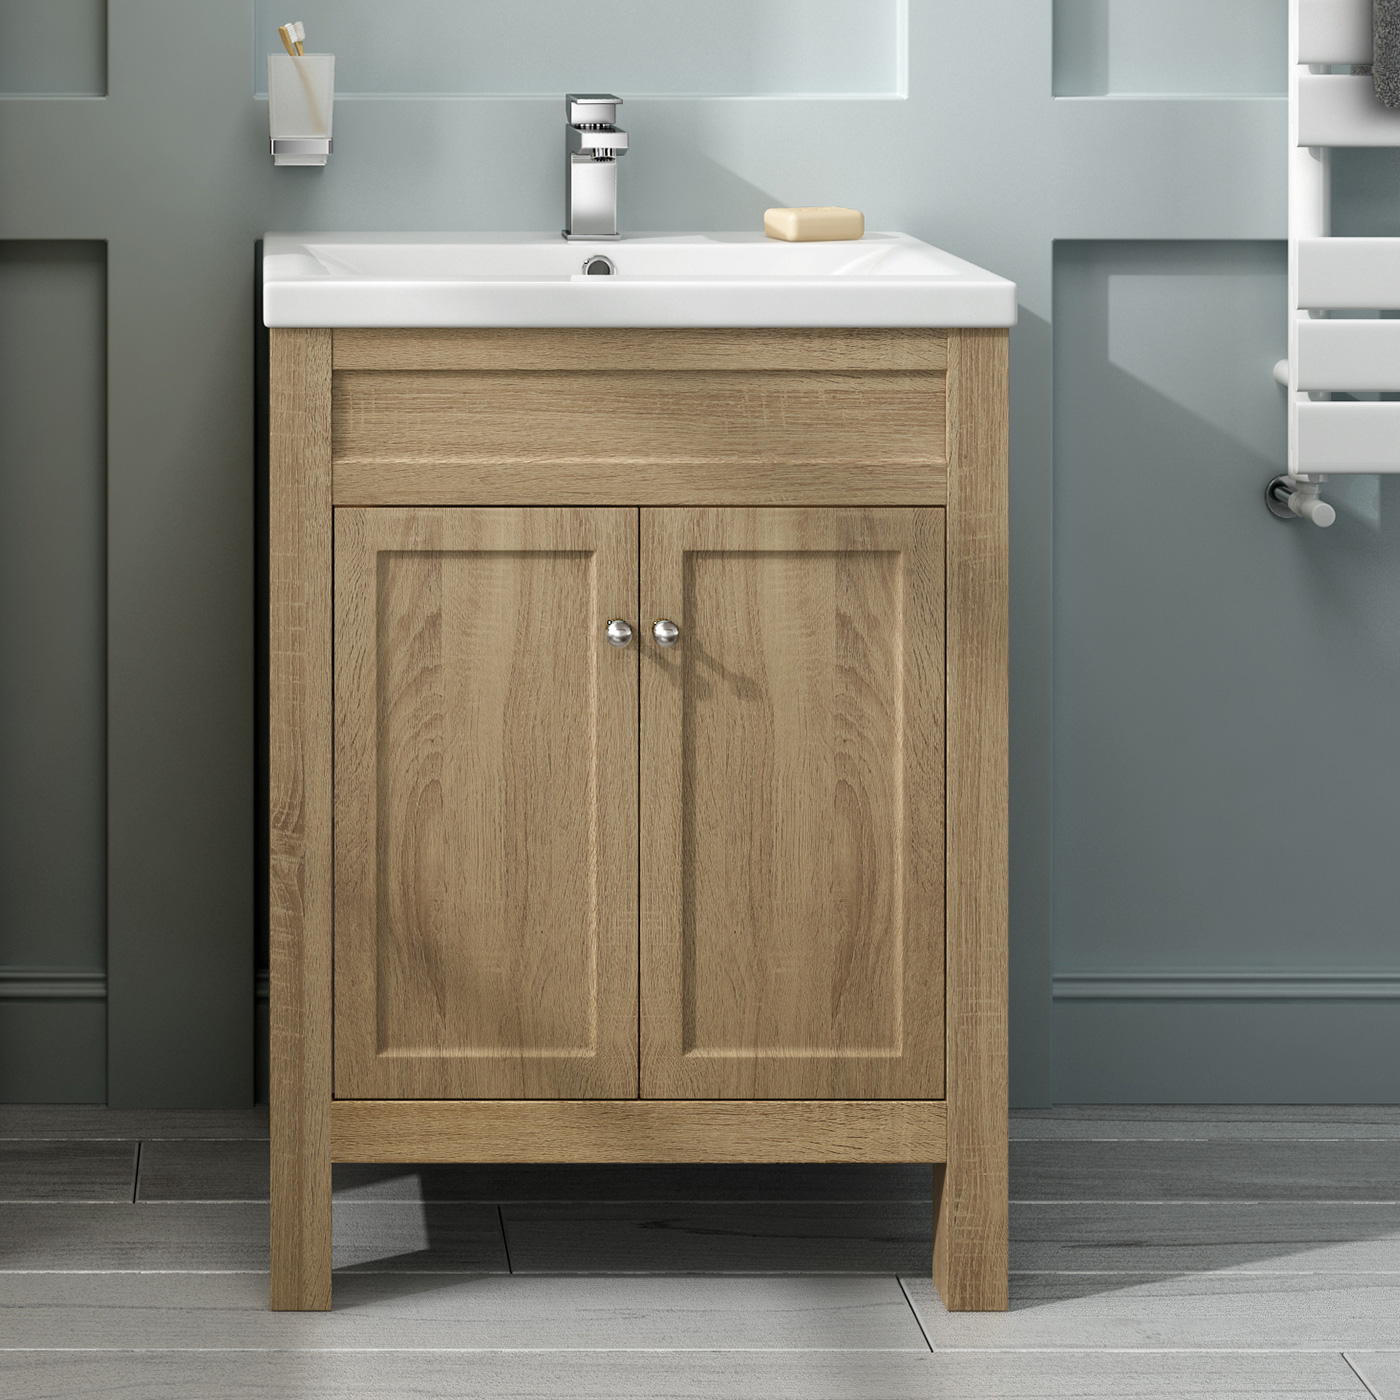 Grab A Good Vanity Unit For Your Privy Darlanefurniture intended for size 1400 X 1400